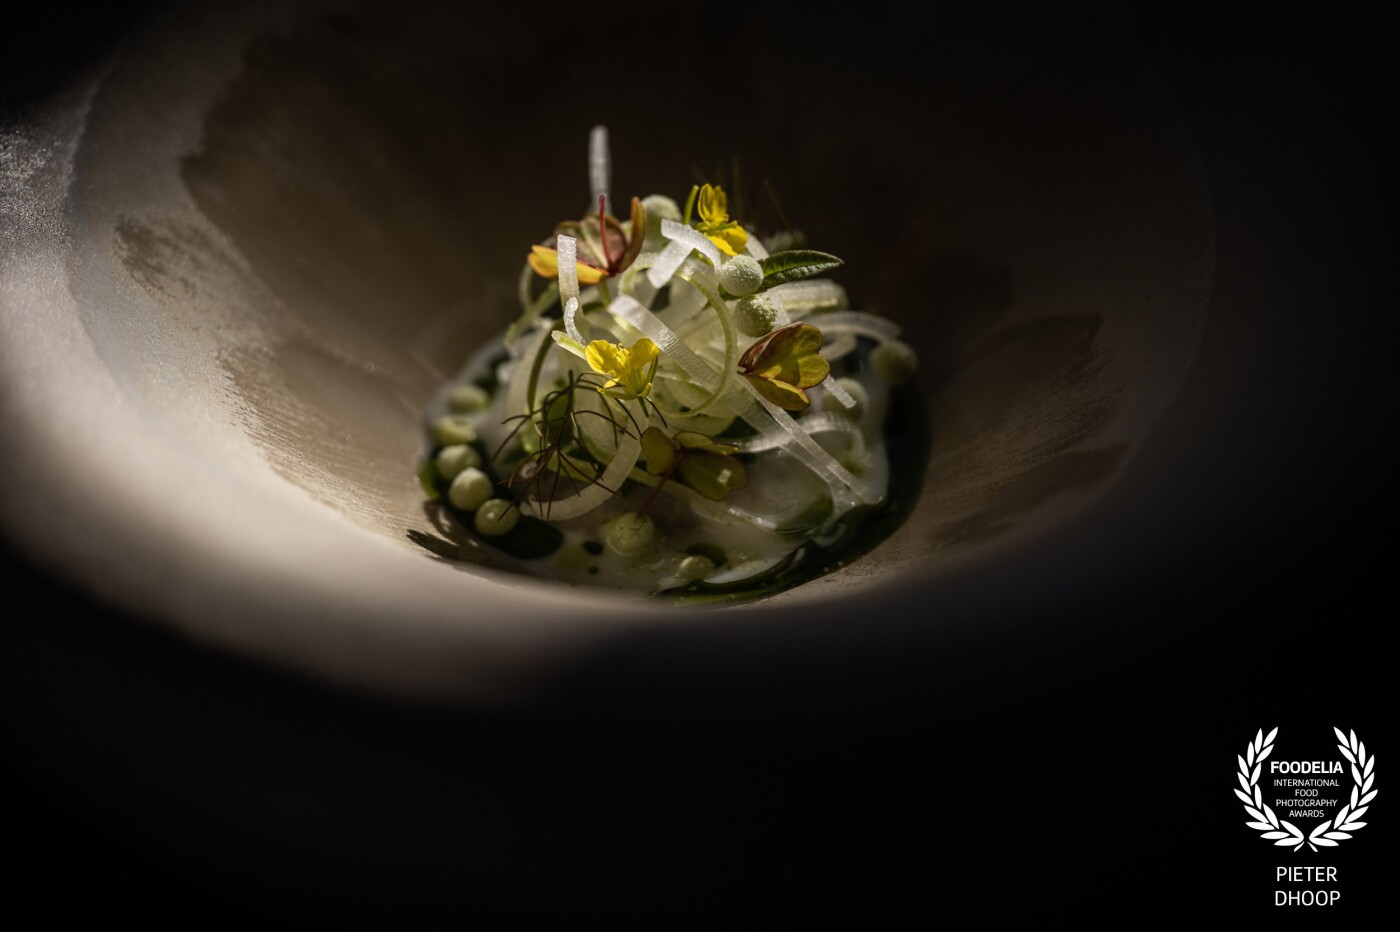 Oyster, celery, mustard flowers, frozen "pakt" flavors. Created by two michelin starred chef Nick Bril from restaurant The Jane in Antwerp (Belgium).<br />
Close to the restaurant they have some roof gardens where they grow a lot of different herbs and flowers that are used in the dishes. Those roof gardens are called "Pakt".<br />
<br />
Image made with the fujifilm GFX100 and GF120mm F4 lens. I've used daylight and had some last sunrays just before the sunset. So I've had to be quick to make sure everything turned out perfect.